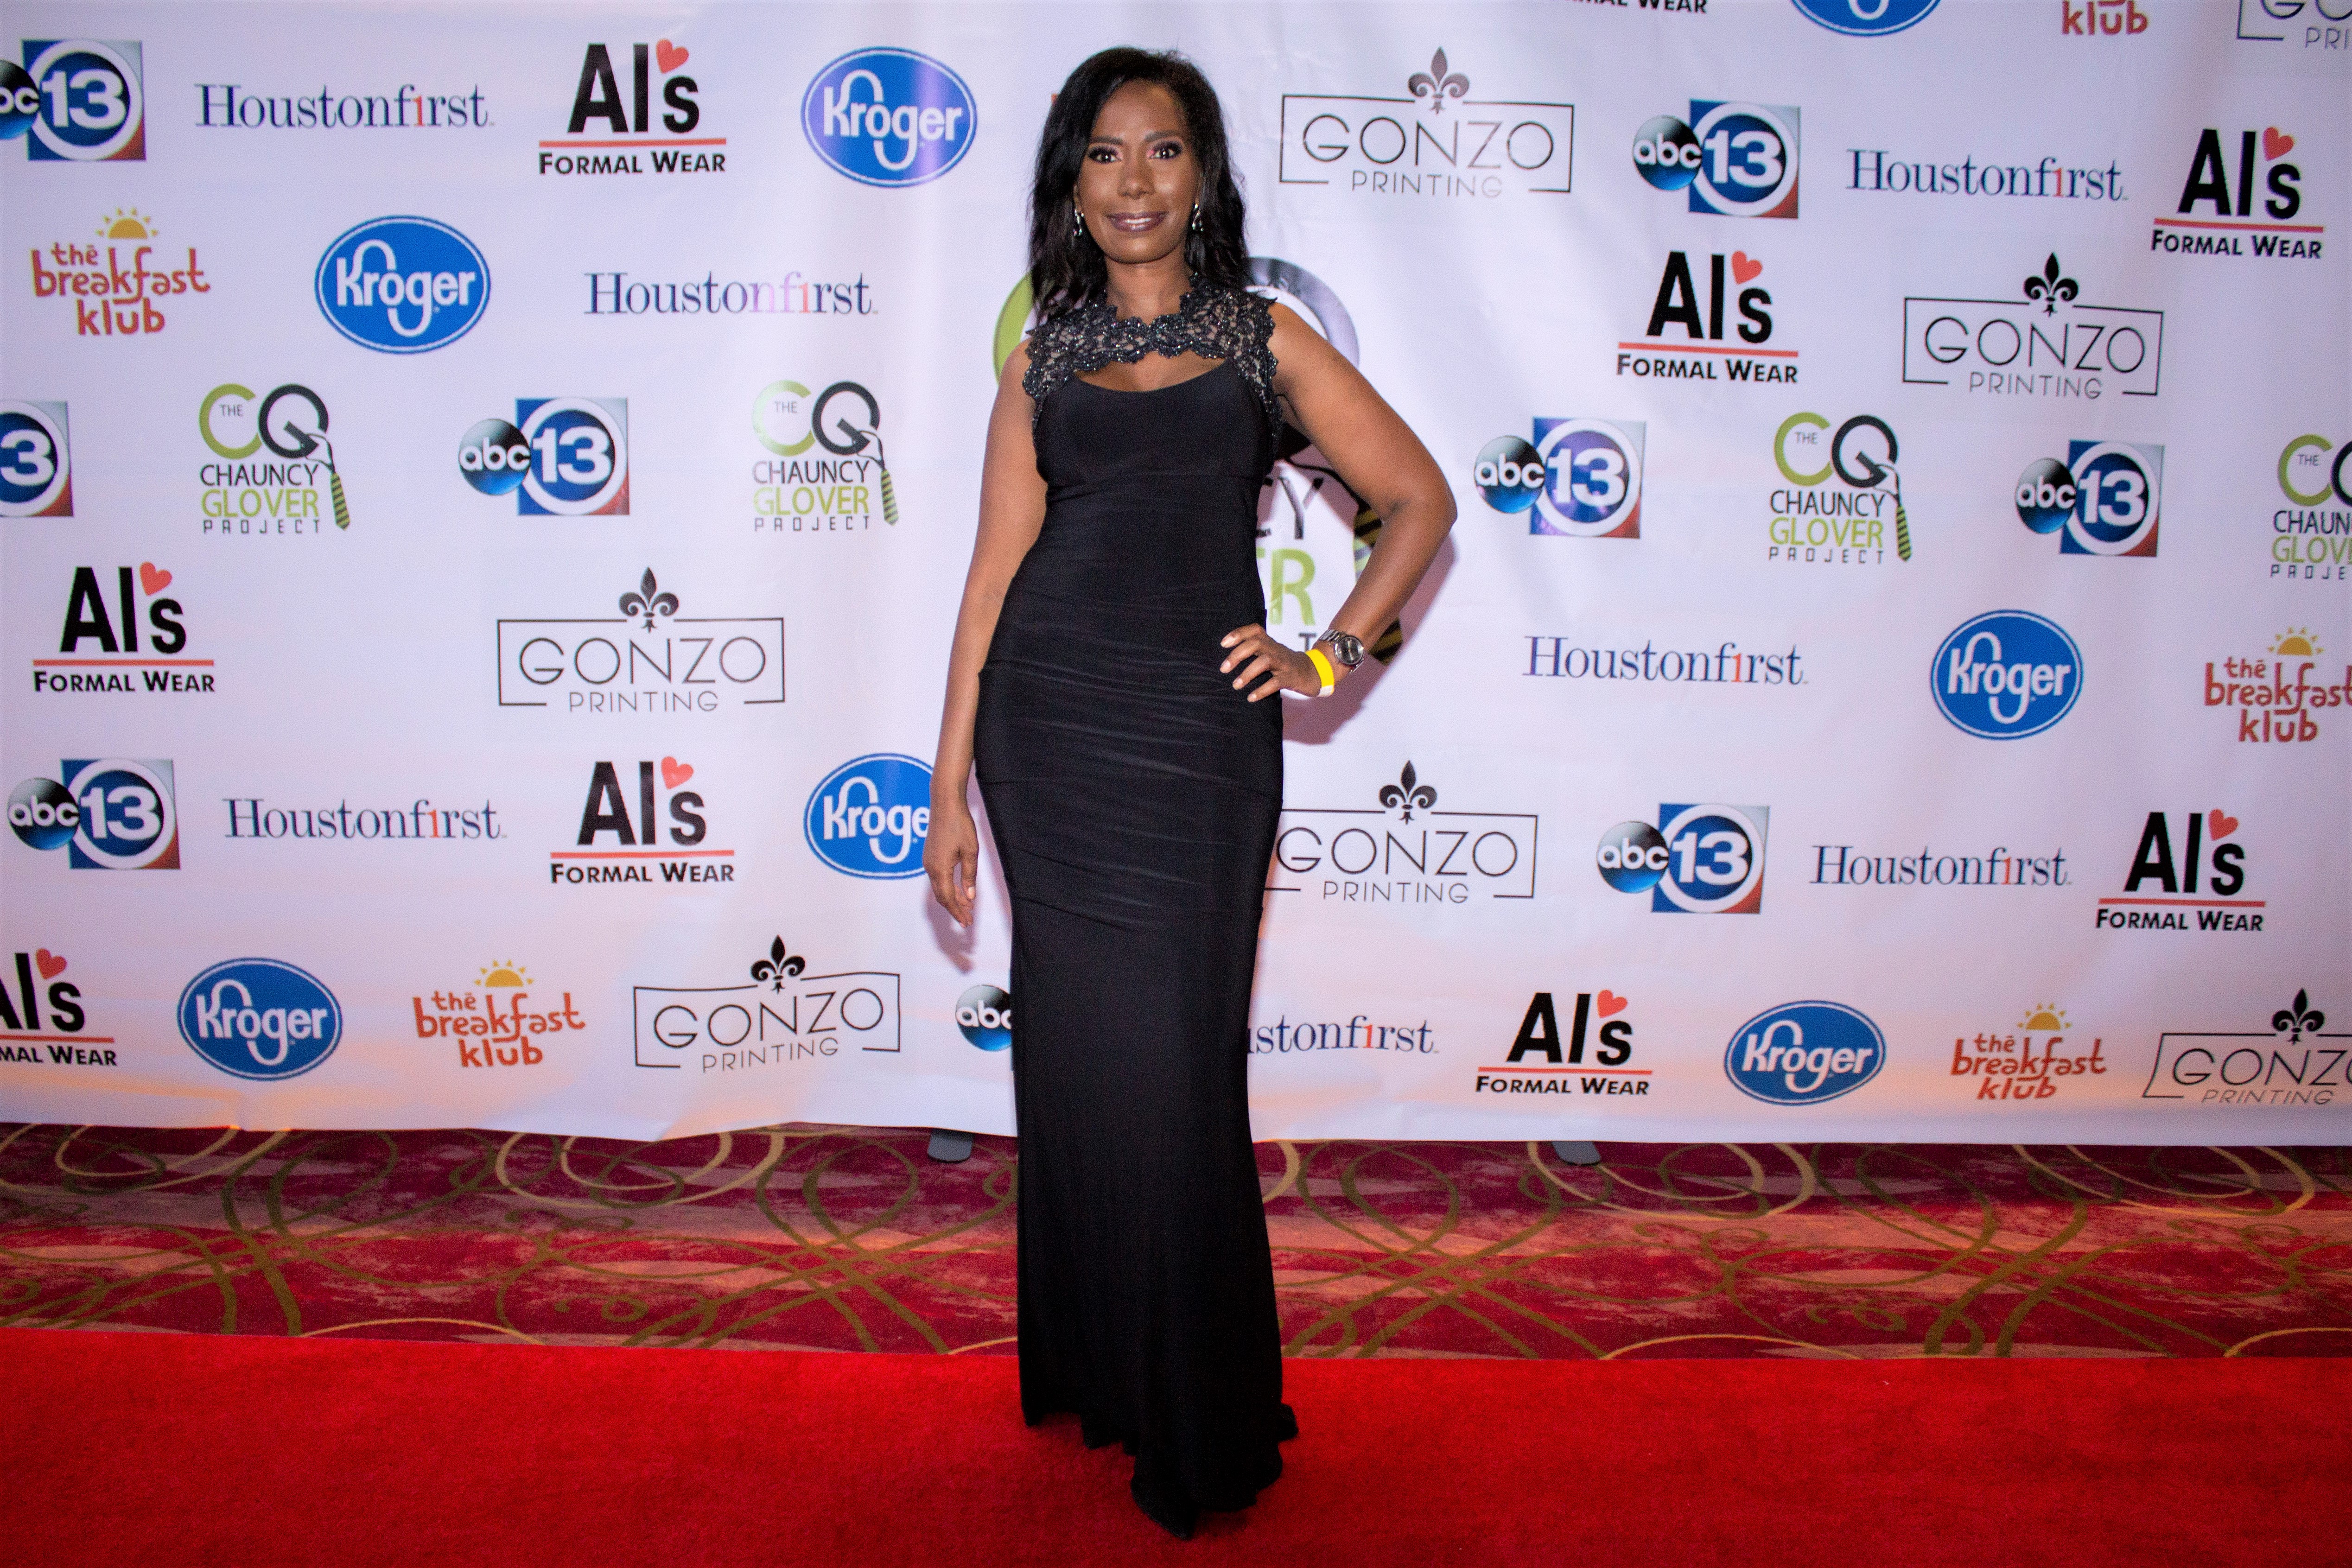 The Chauncy Glover Project "3rd Annual Black Tie Gala" Red Carpet